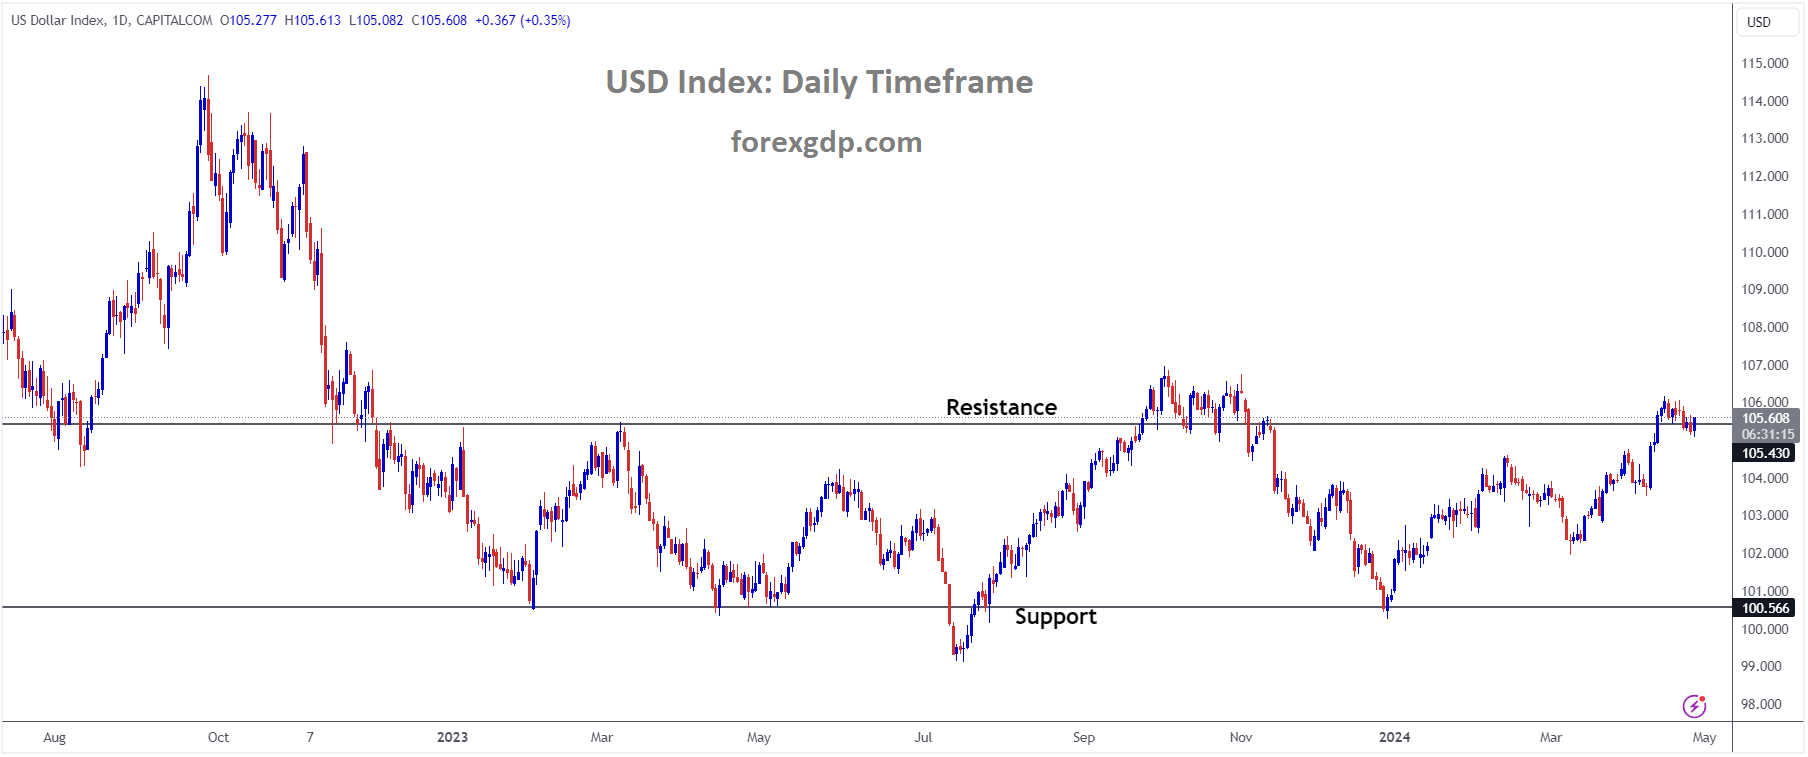 USD Index Market Price is moving in box pattern and market has reached resistance area of the pattern